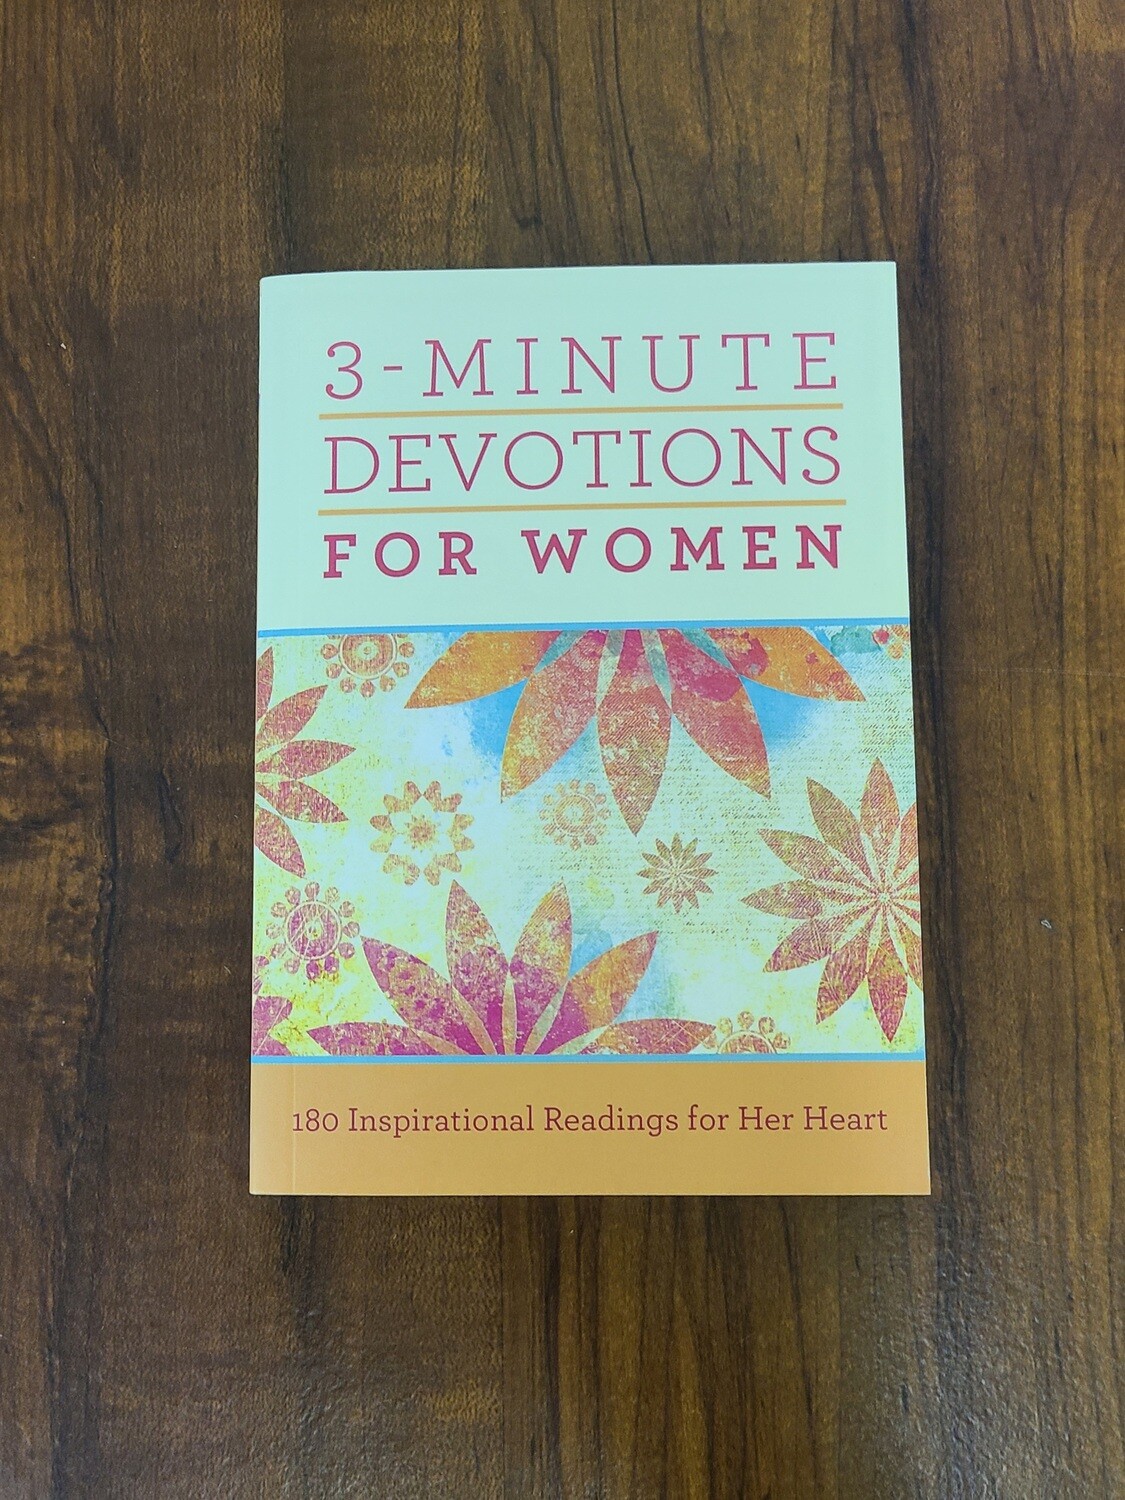 3-Minute Devotions for Women by Barbour Publishing Inc